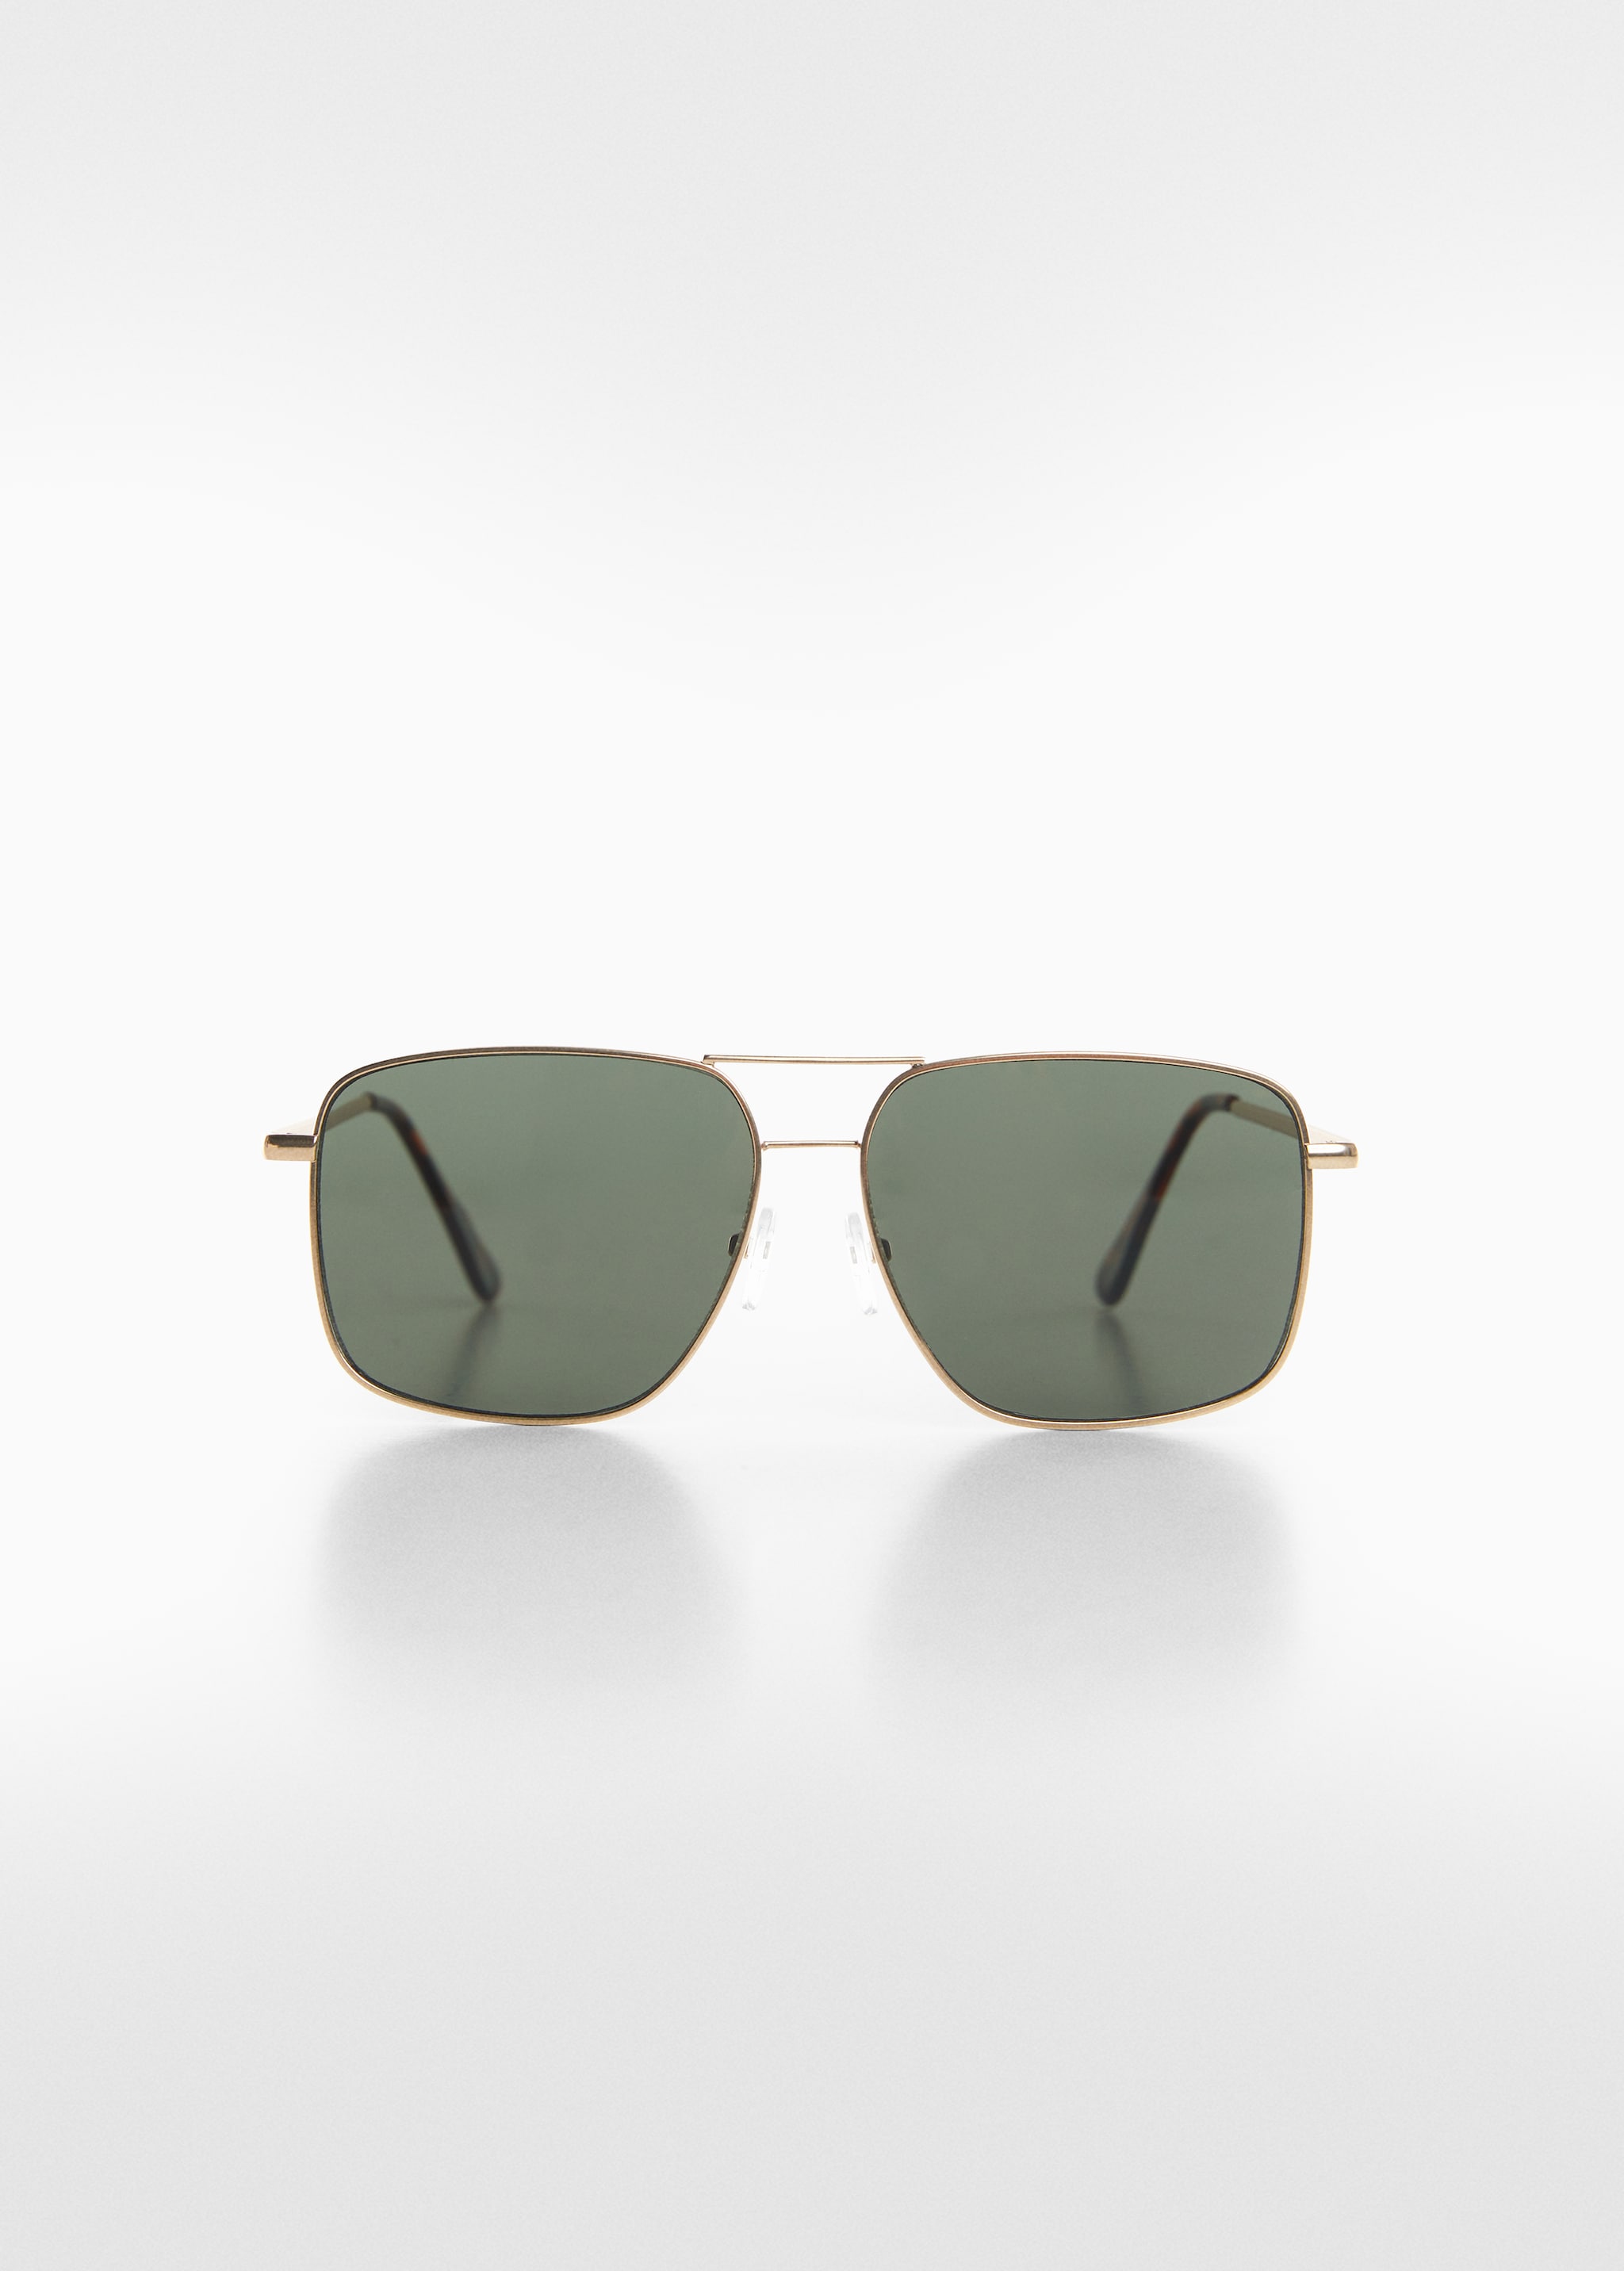 Aviator sunglasses - Article without model